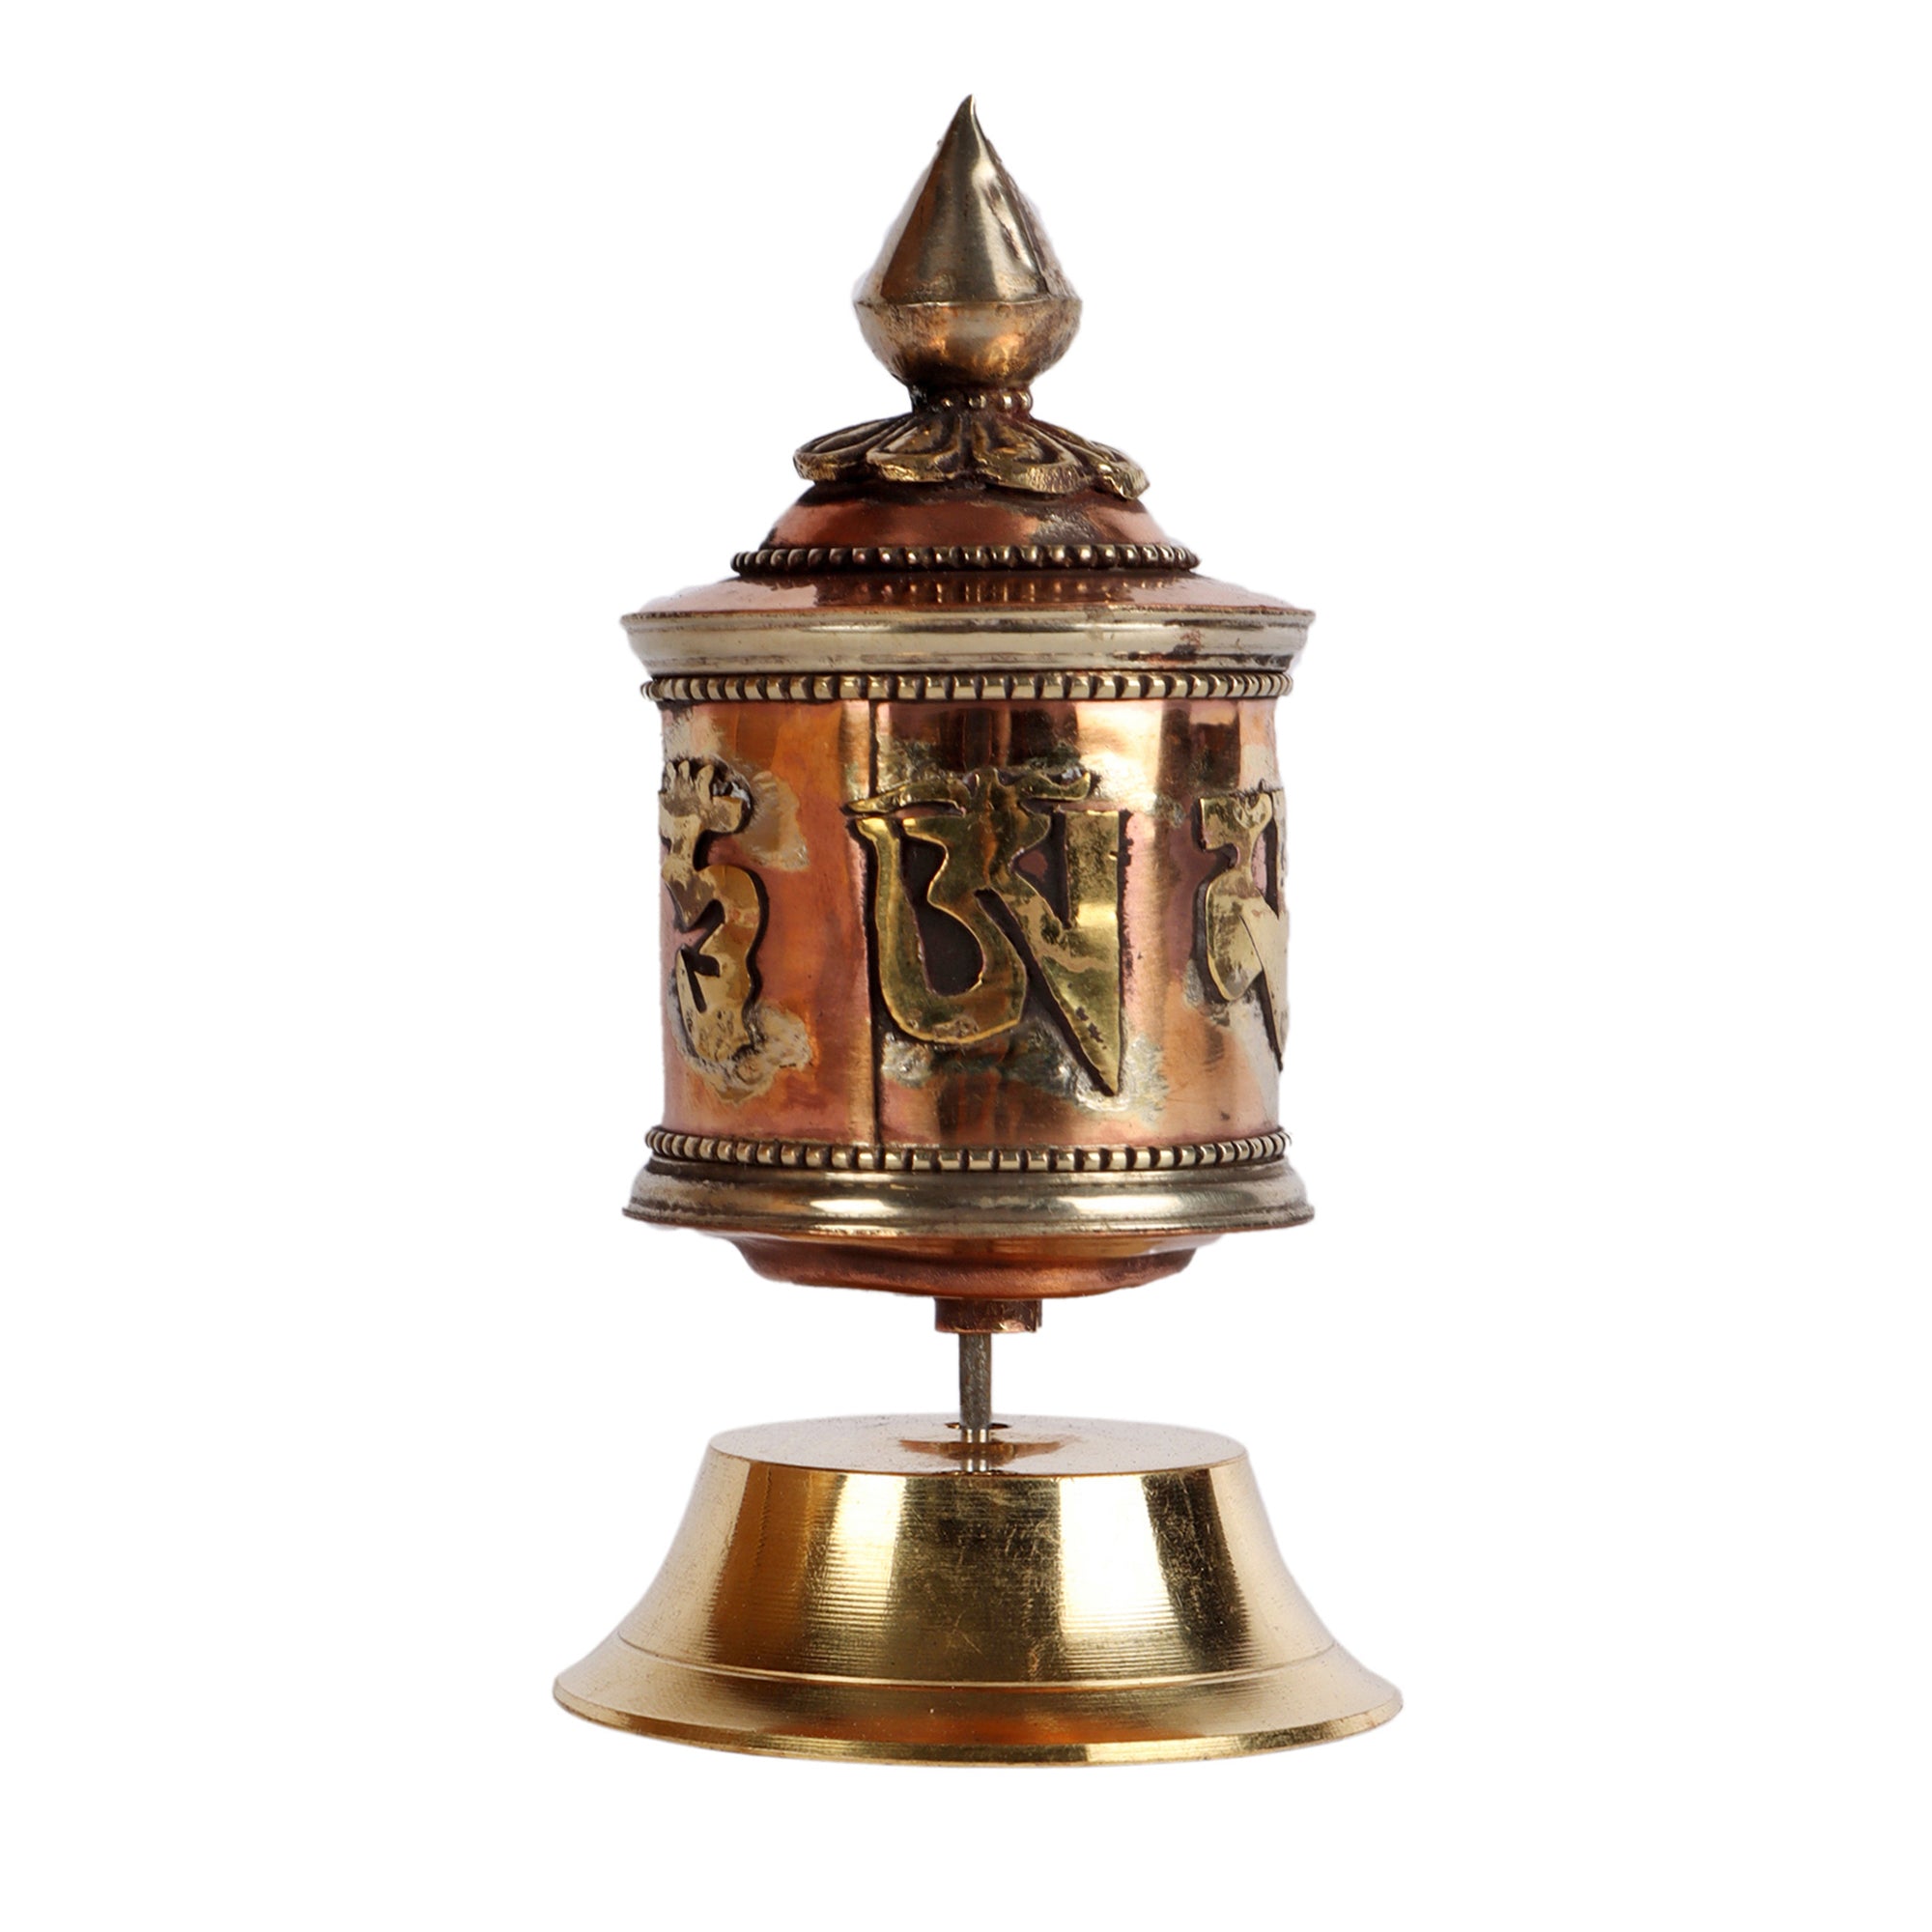 Buddhist Prayer Wheel - Table Top (One-Row Lineage Text)